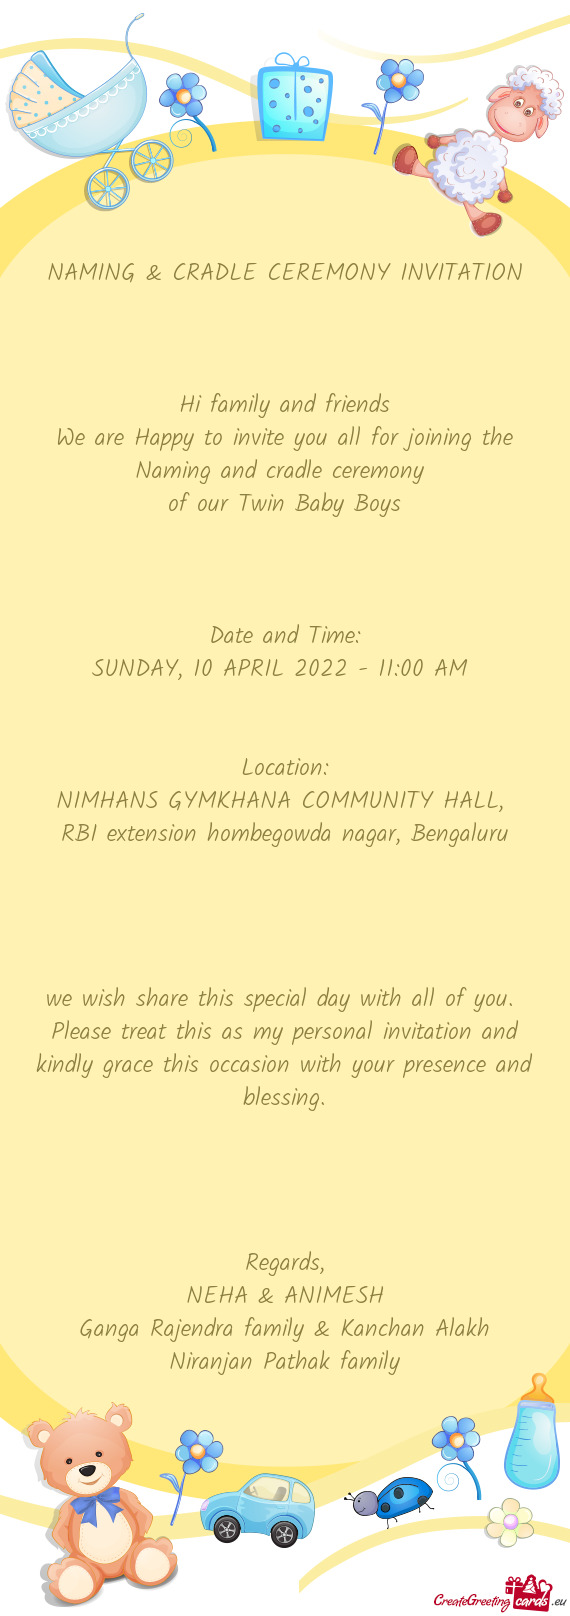 We are Happy to invite you all for joining the Naming and cradle ceremony